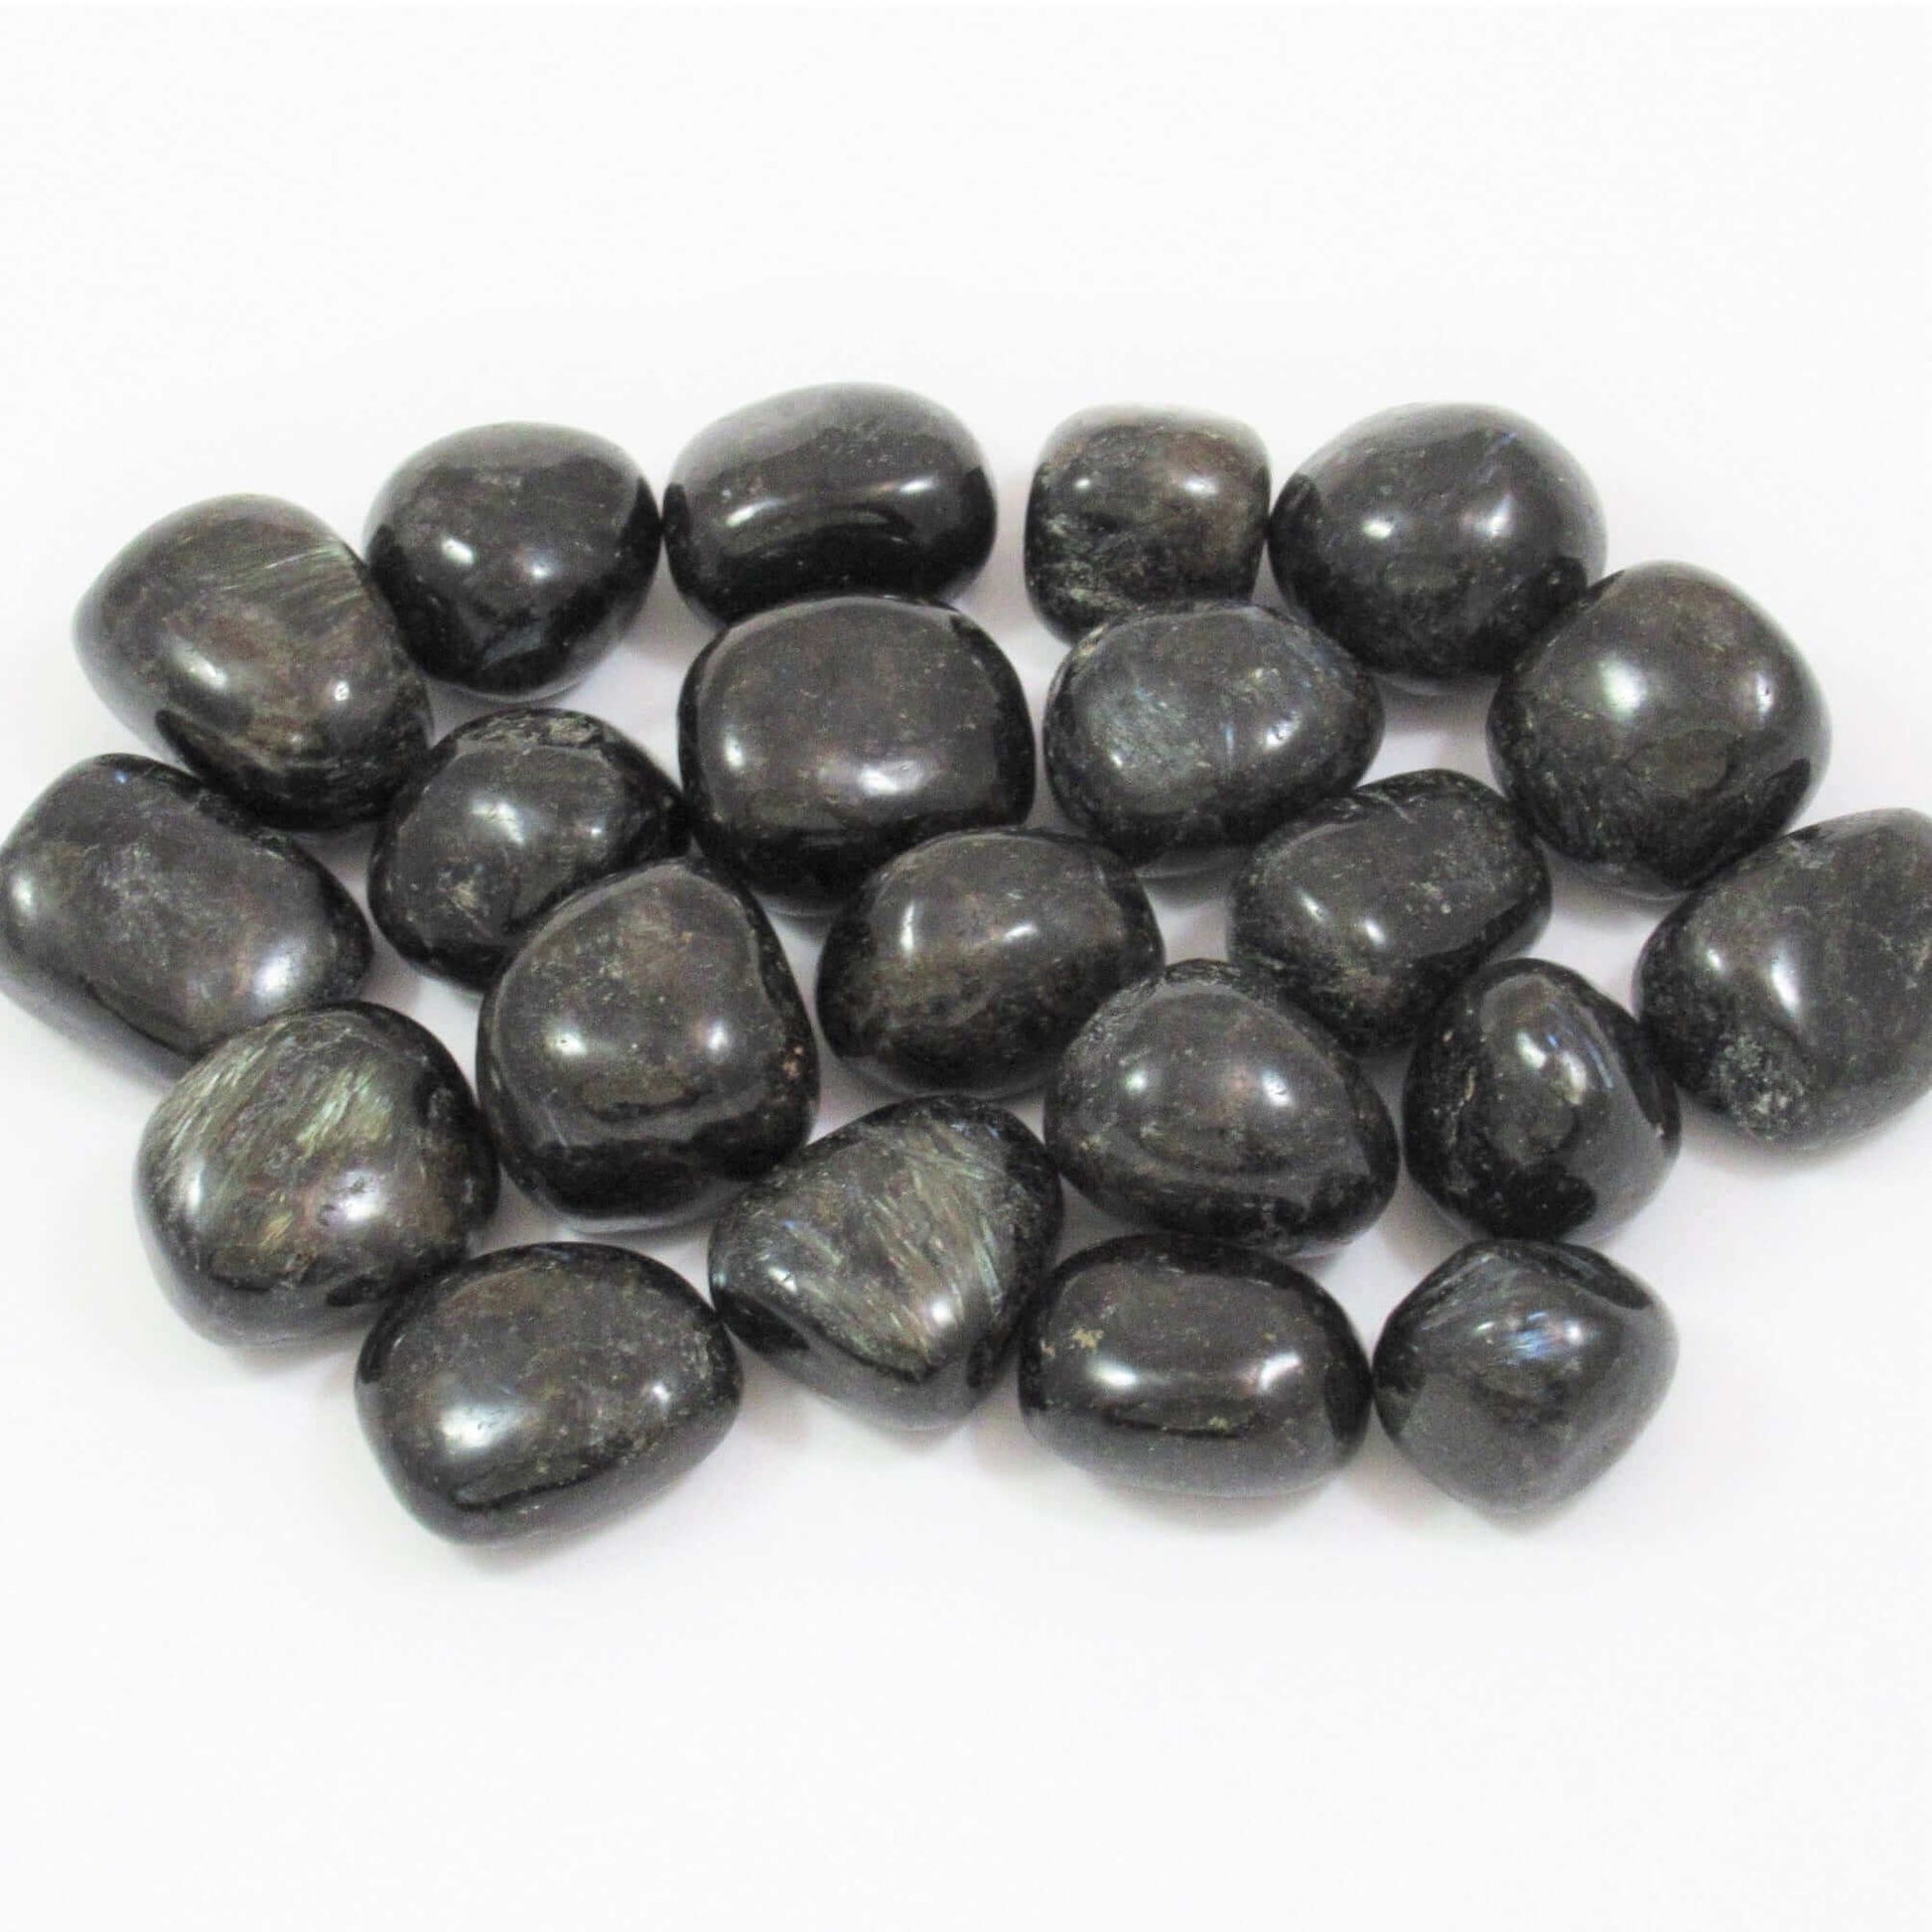 Arfvedsonite Tumbled at $8 only from Spiral Rain